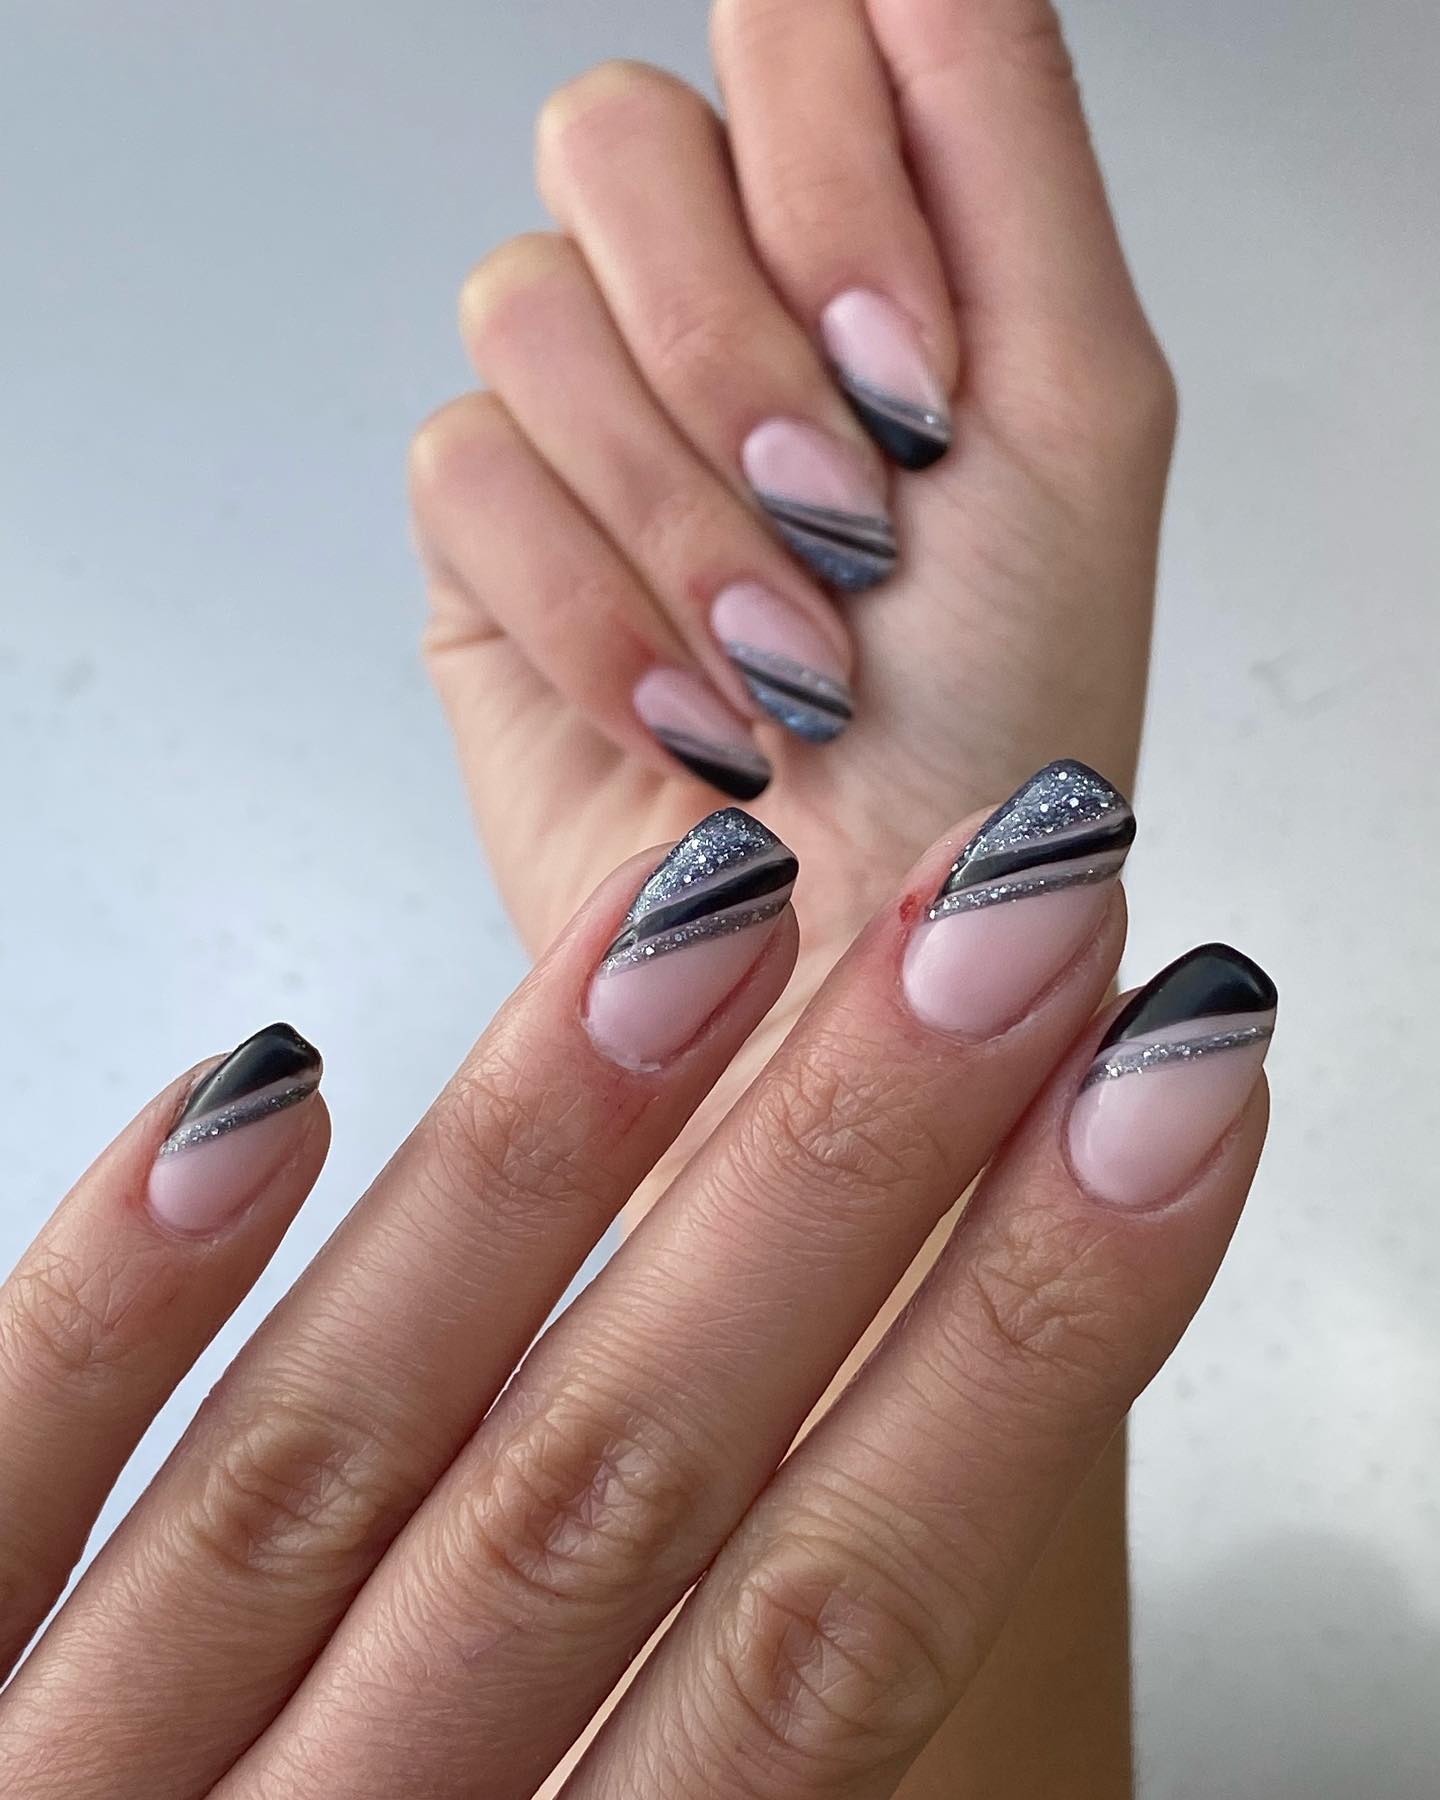 50 Gorgeous Black Nails For A Stylish Manicure